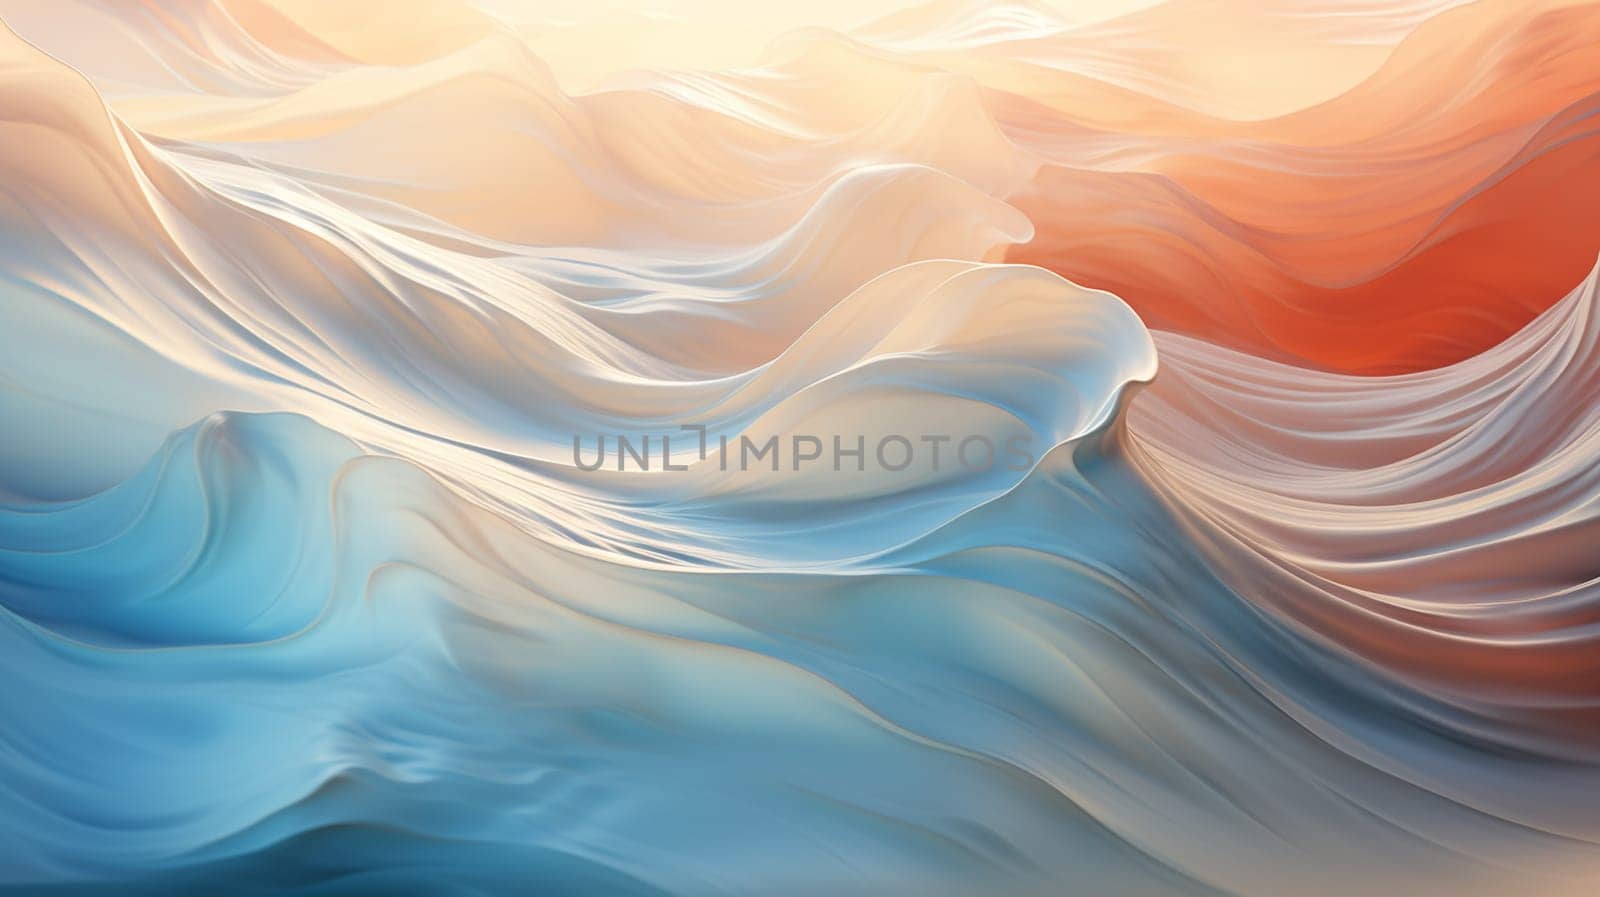 Barrel of bright colorful surfing ocean wave. Tropical background in sunset colors for sport activity with nobody on image. High quality photo